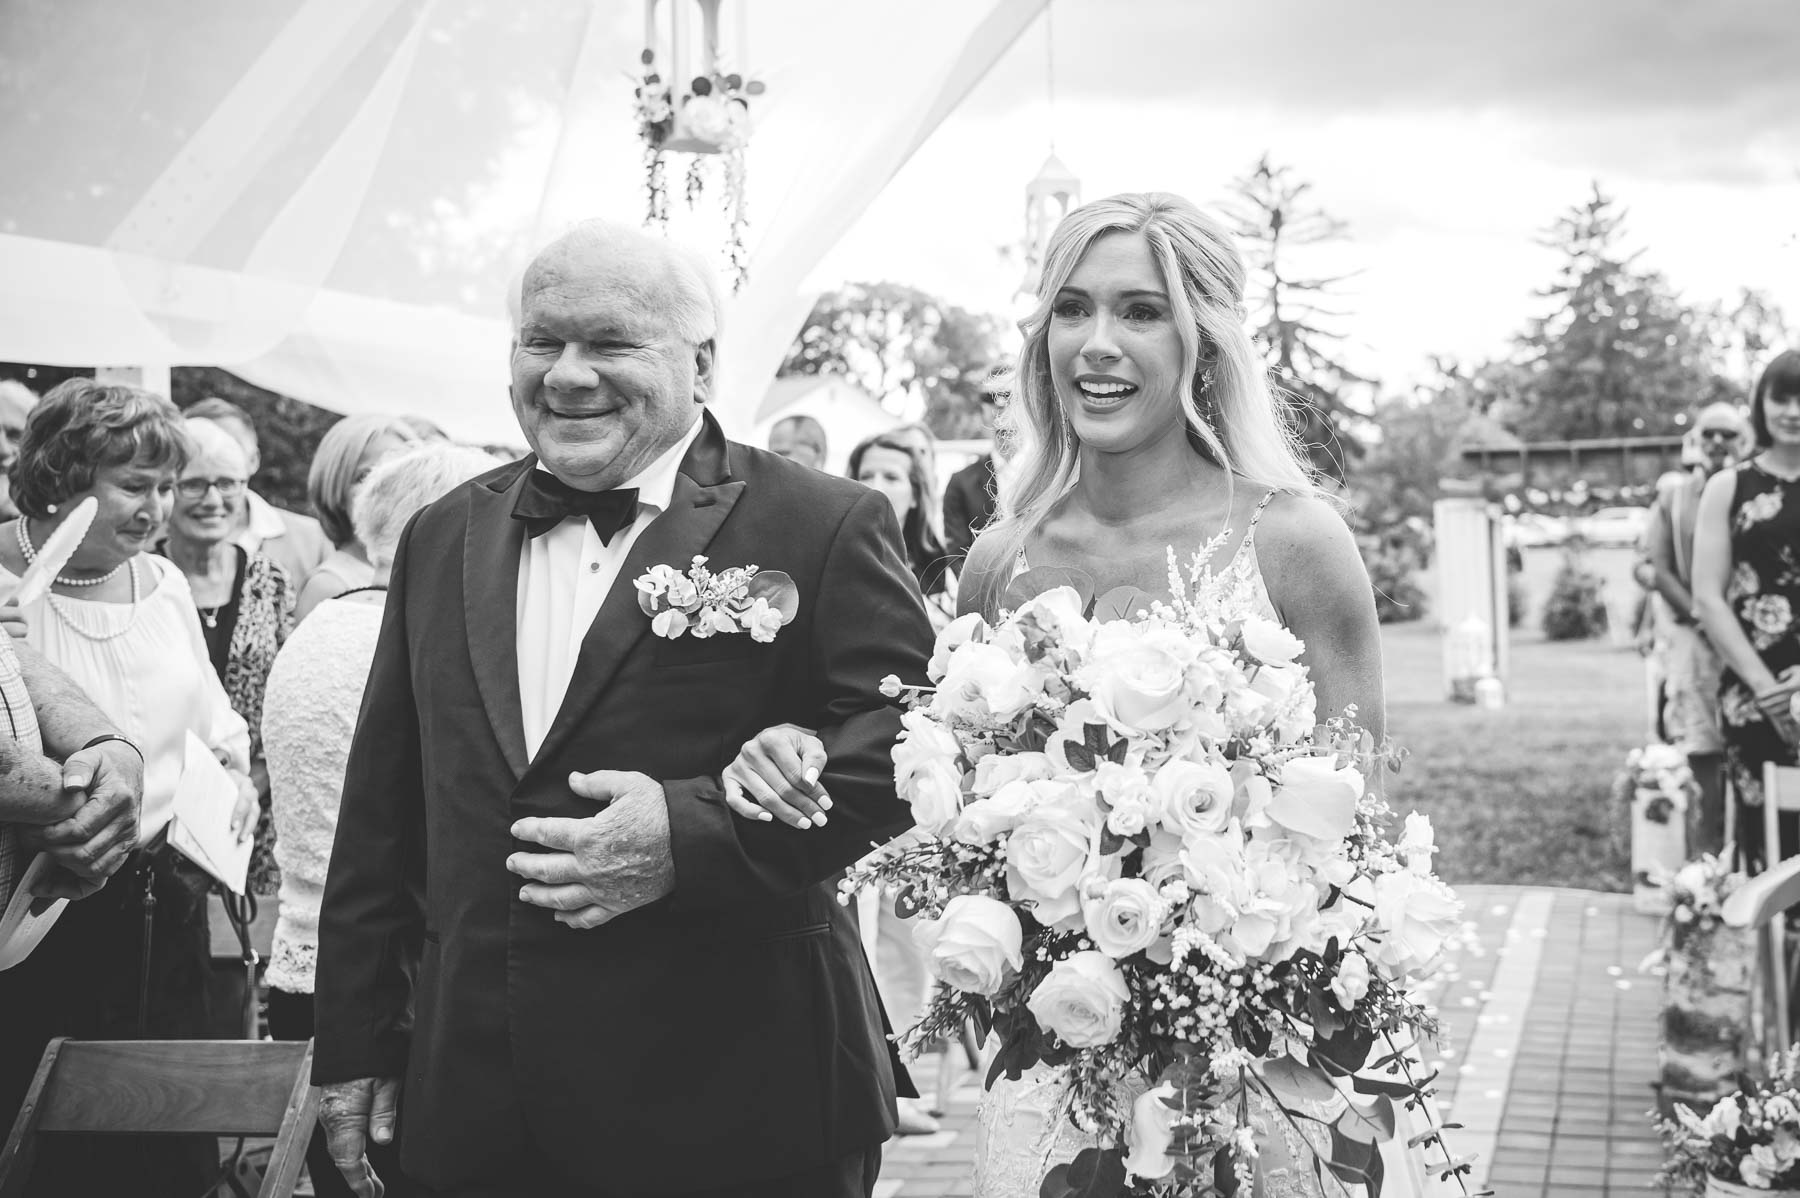 Dad walking daughter down the aisle at her wedding